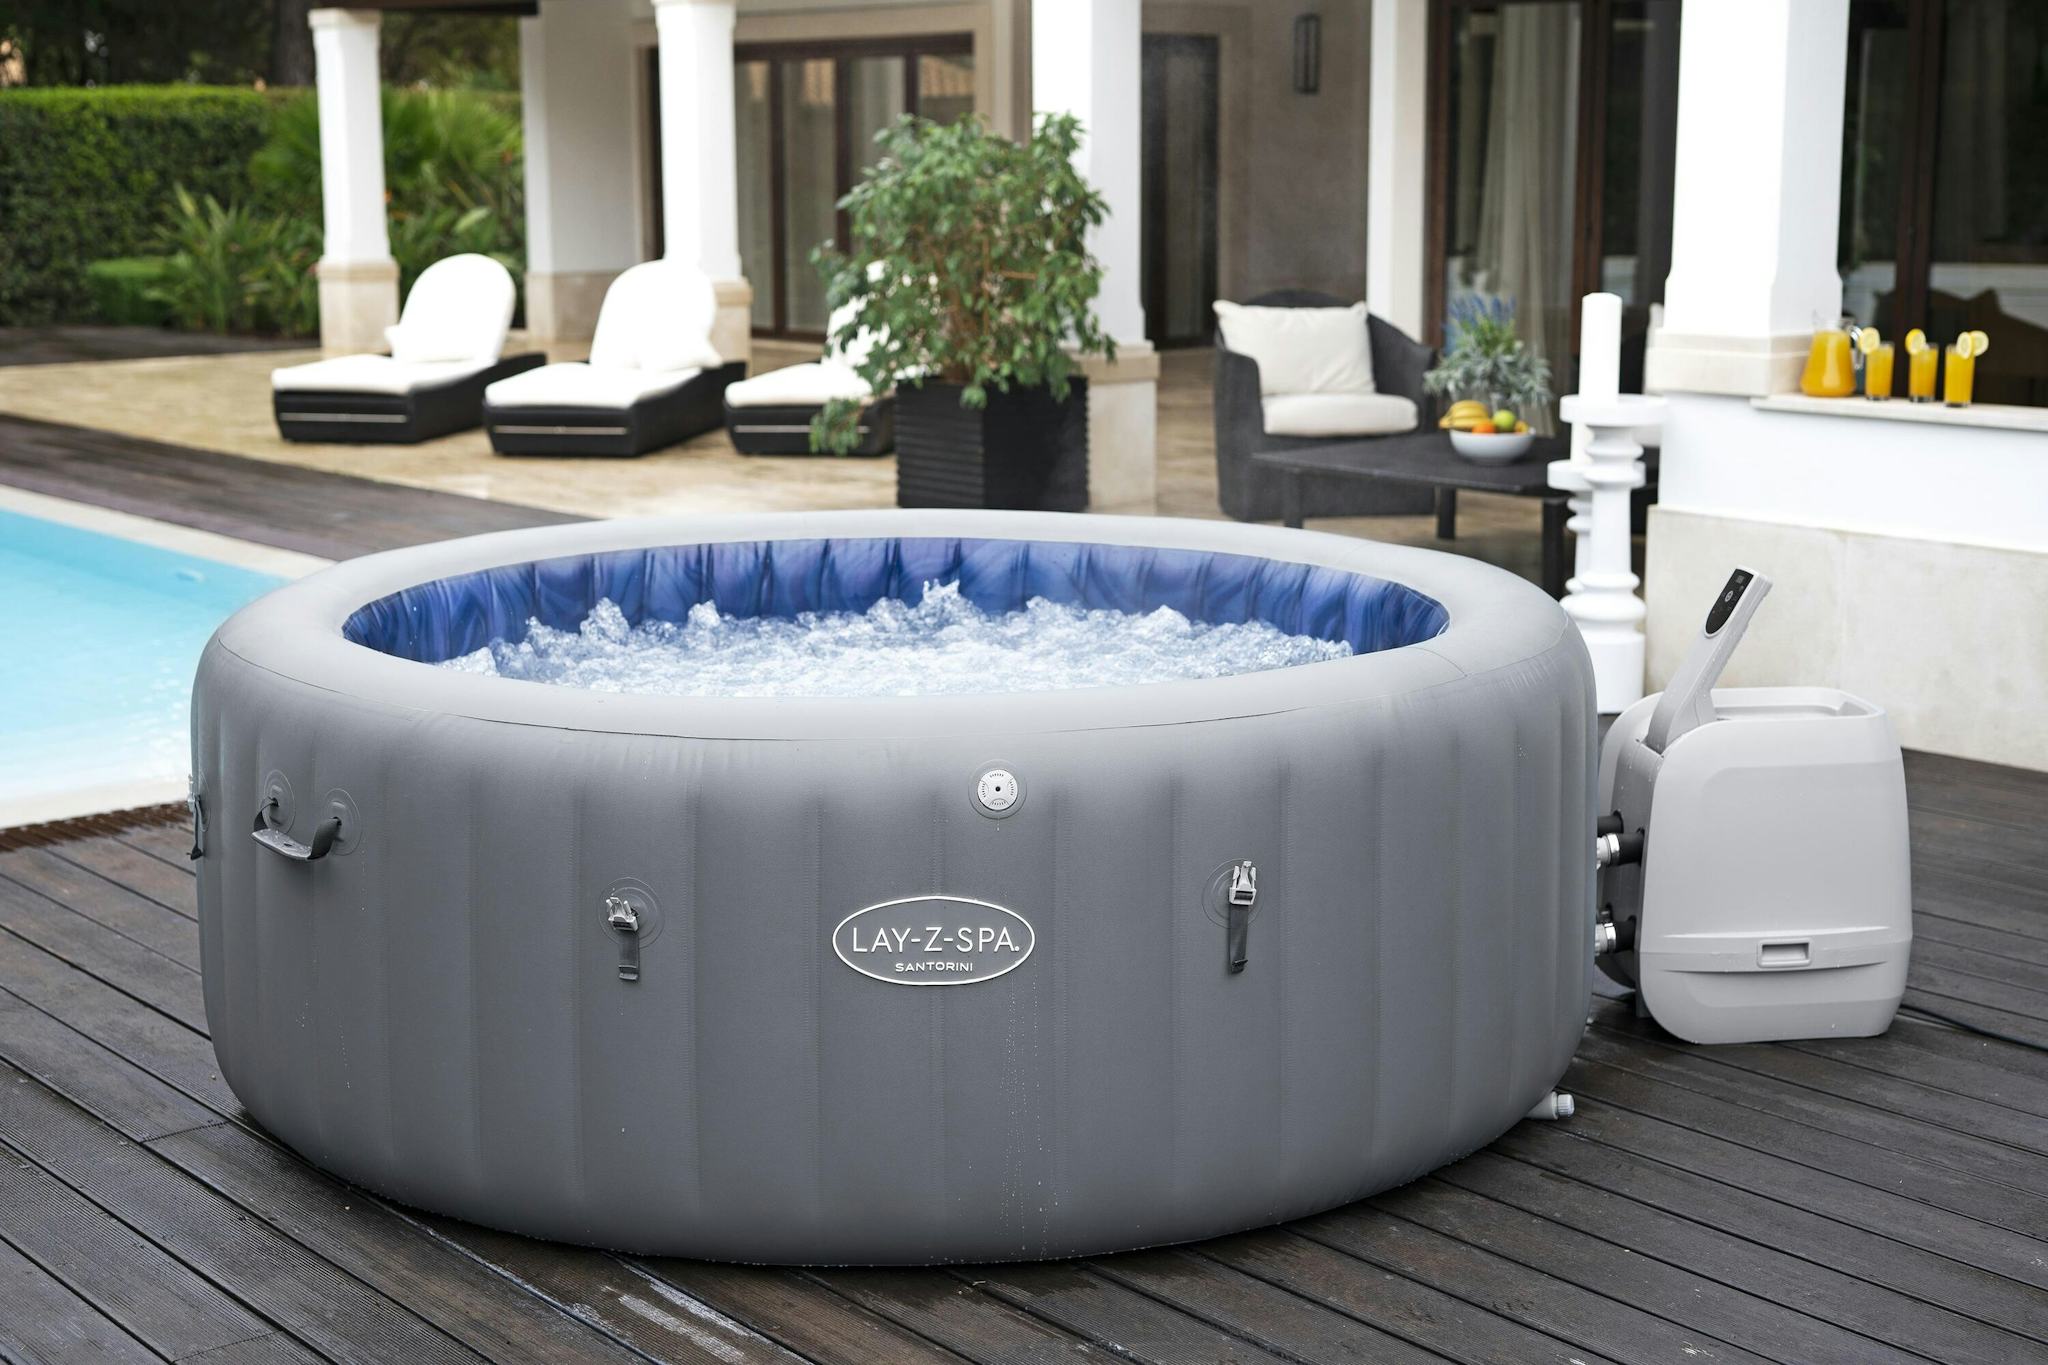 Spas Gonflables Spa gonflable rond Lay-Z-Spa Santorini Hydrojet pro™ 5 - 7 personnes Wifi Bestway 6